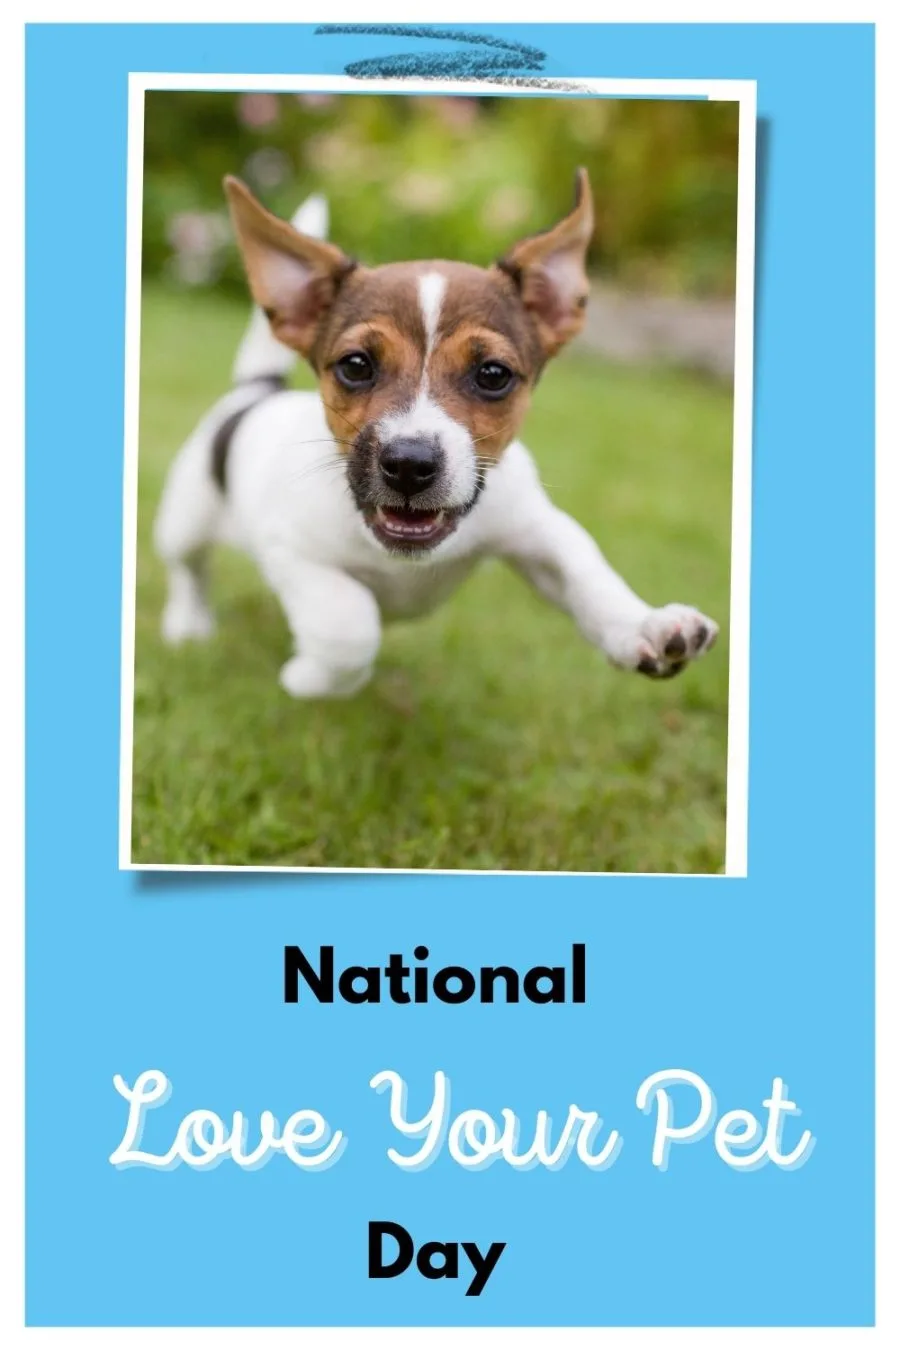 National Love Your Pet Day, February 20